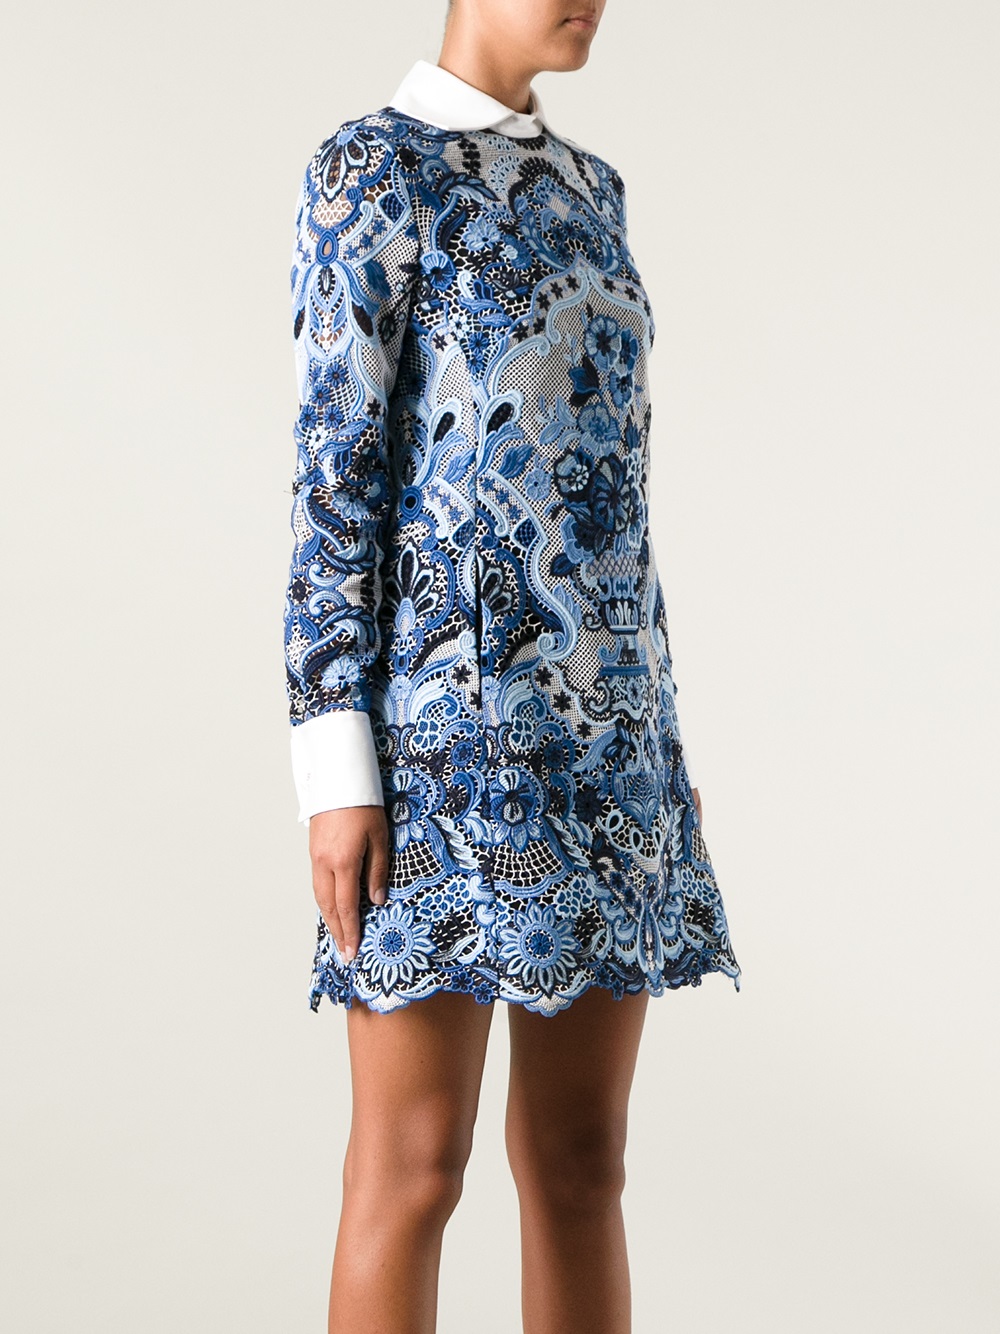 Lyst - Valentino Embroidered Floral Dress in Blue